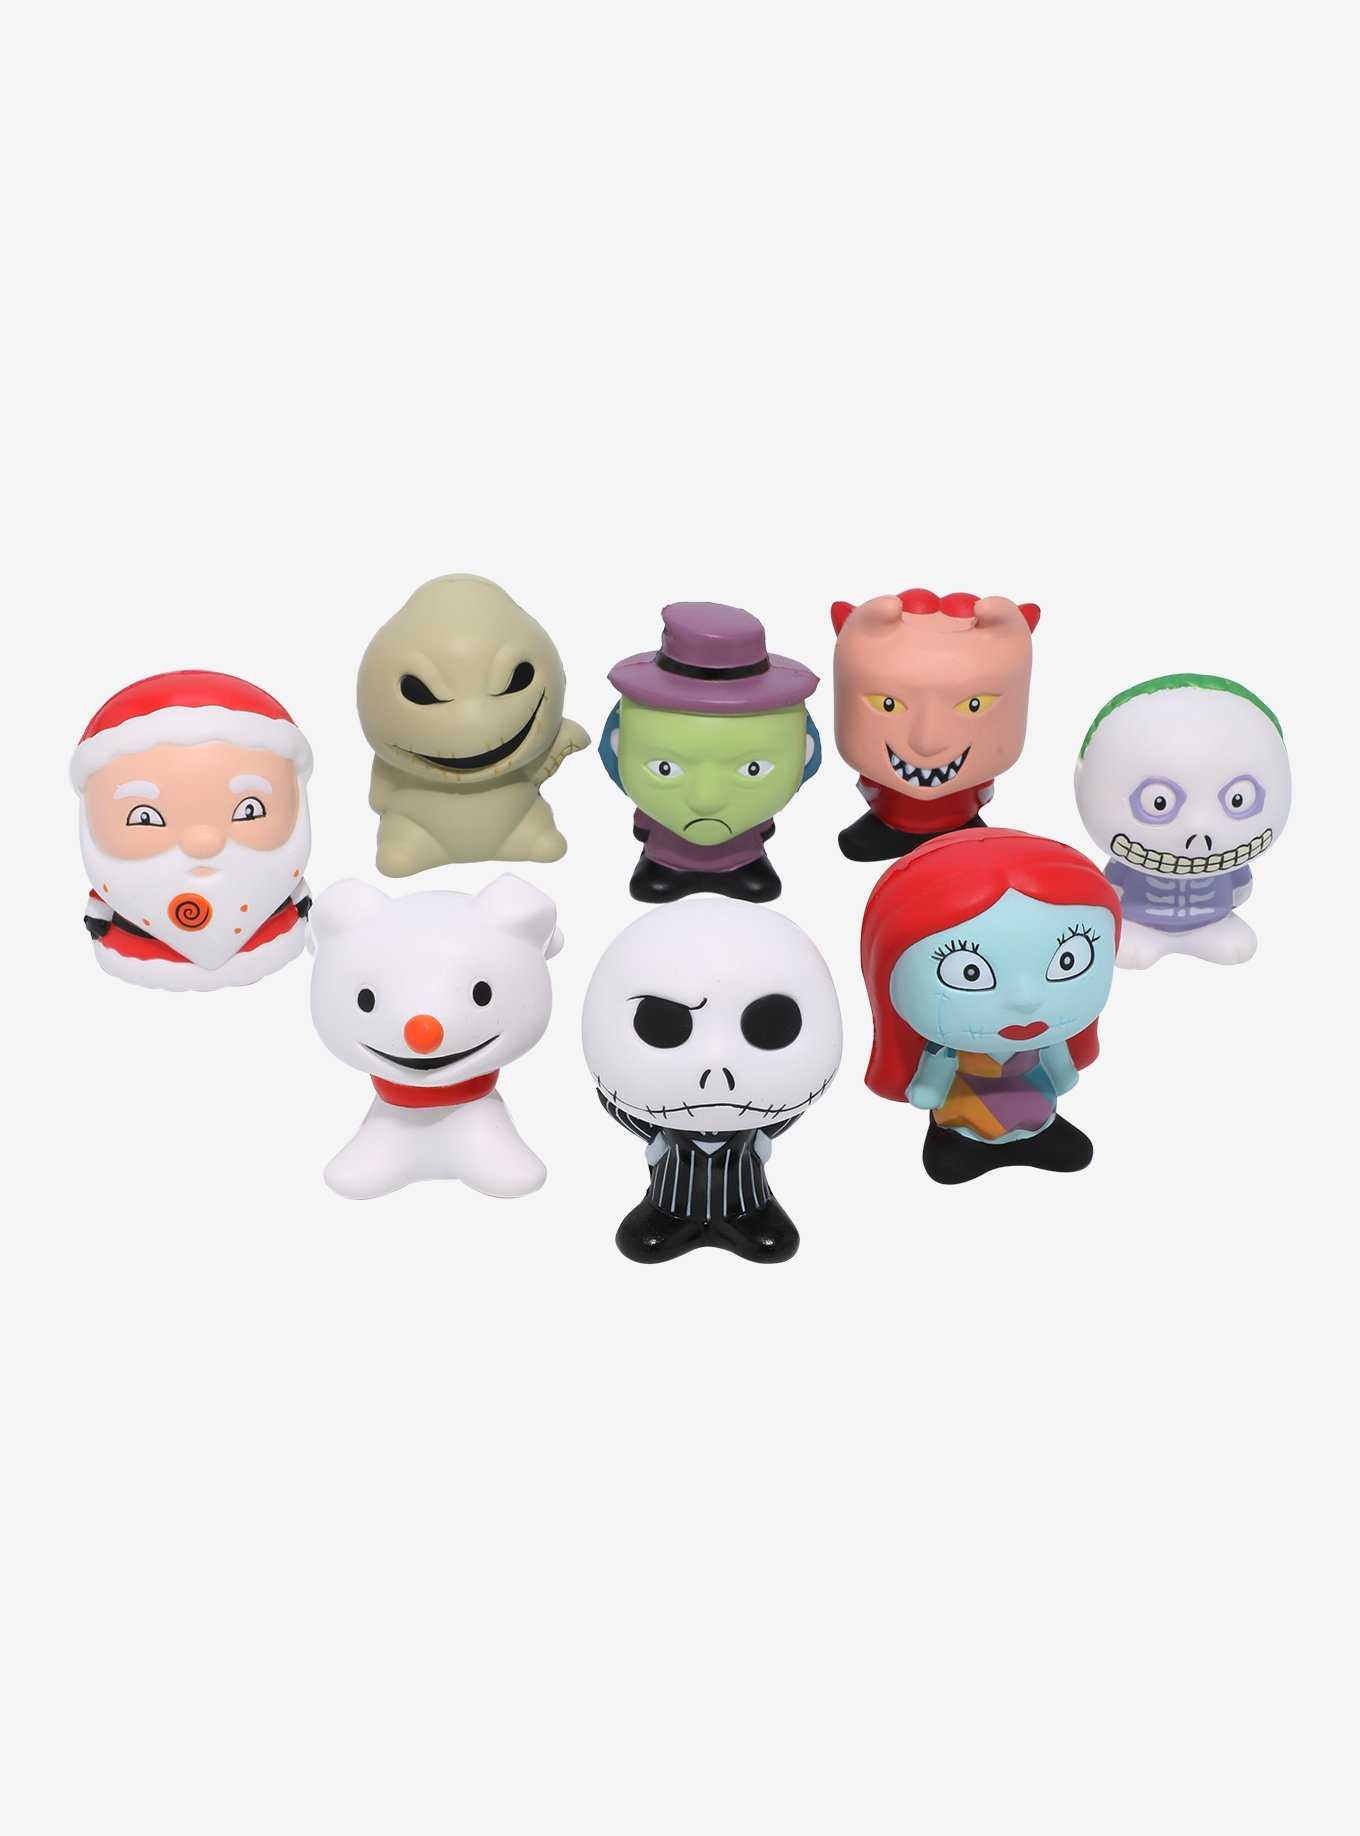 Squish 'Ums! The Nightmare Before Christmas Character Blind Box Figure, , hi-res